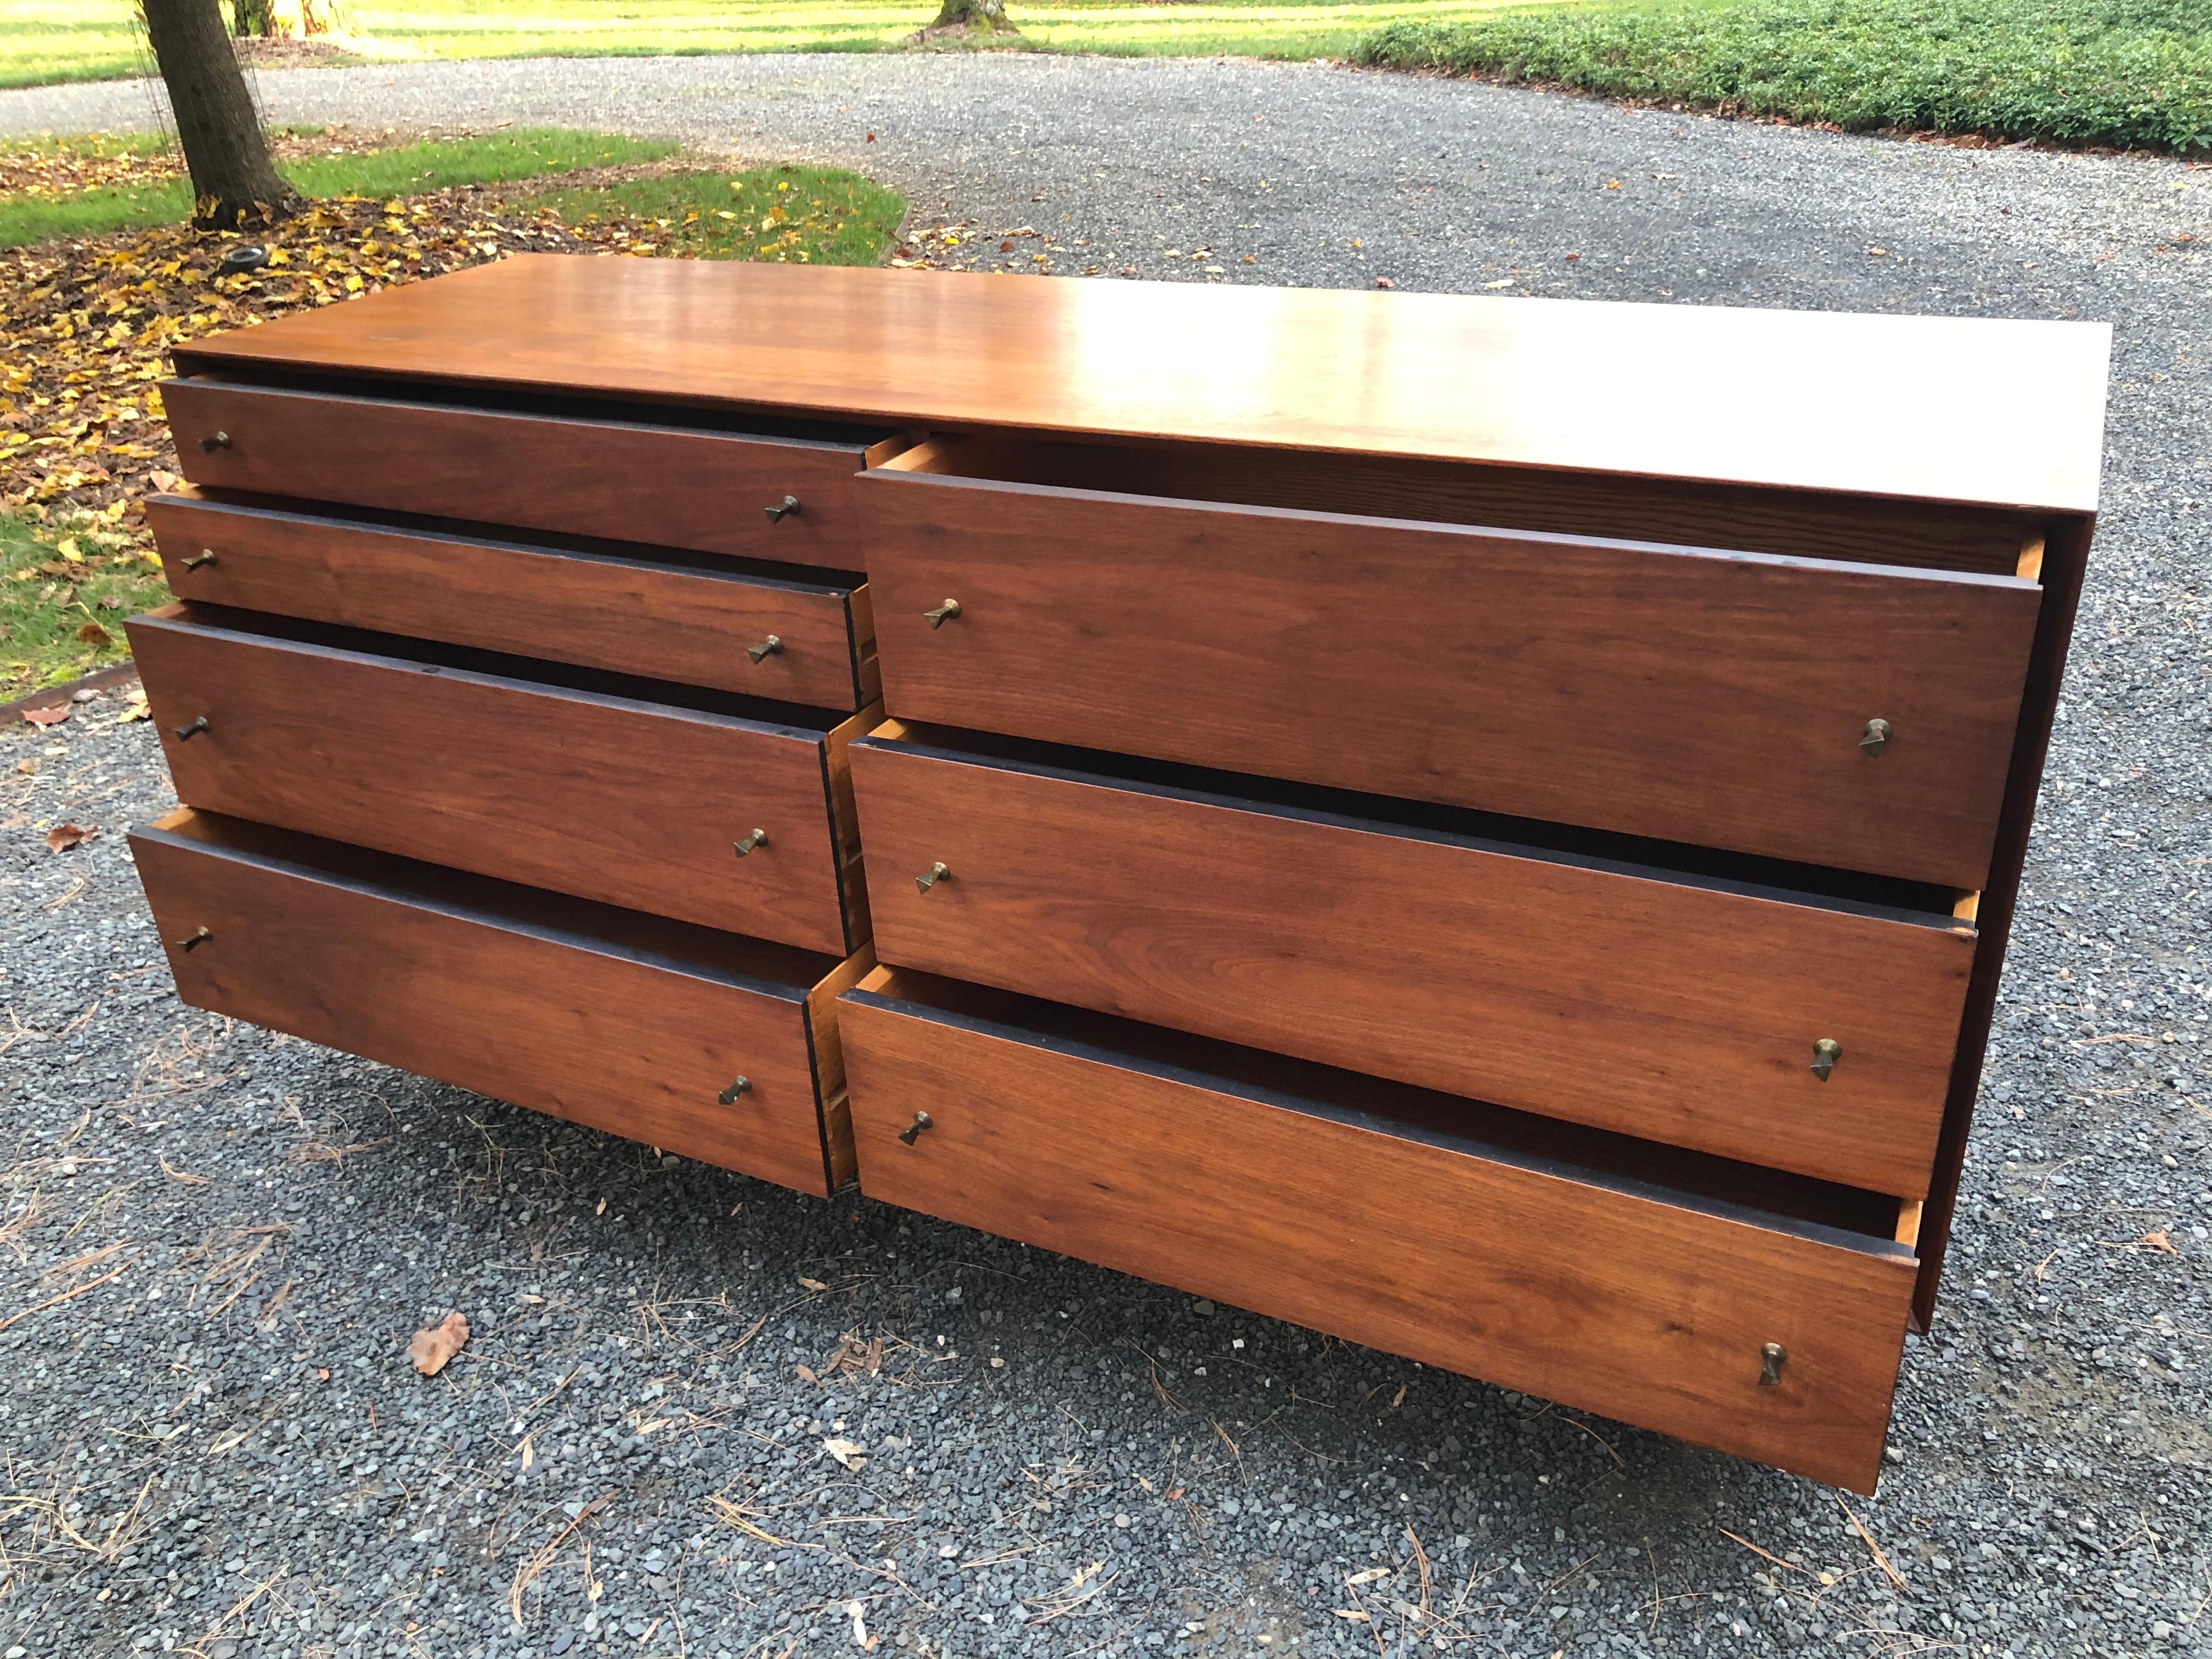 American Sleek Walnut Mid-Century Modern Chest of Drawers Credenza For Sale